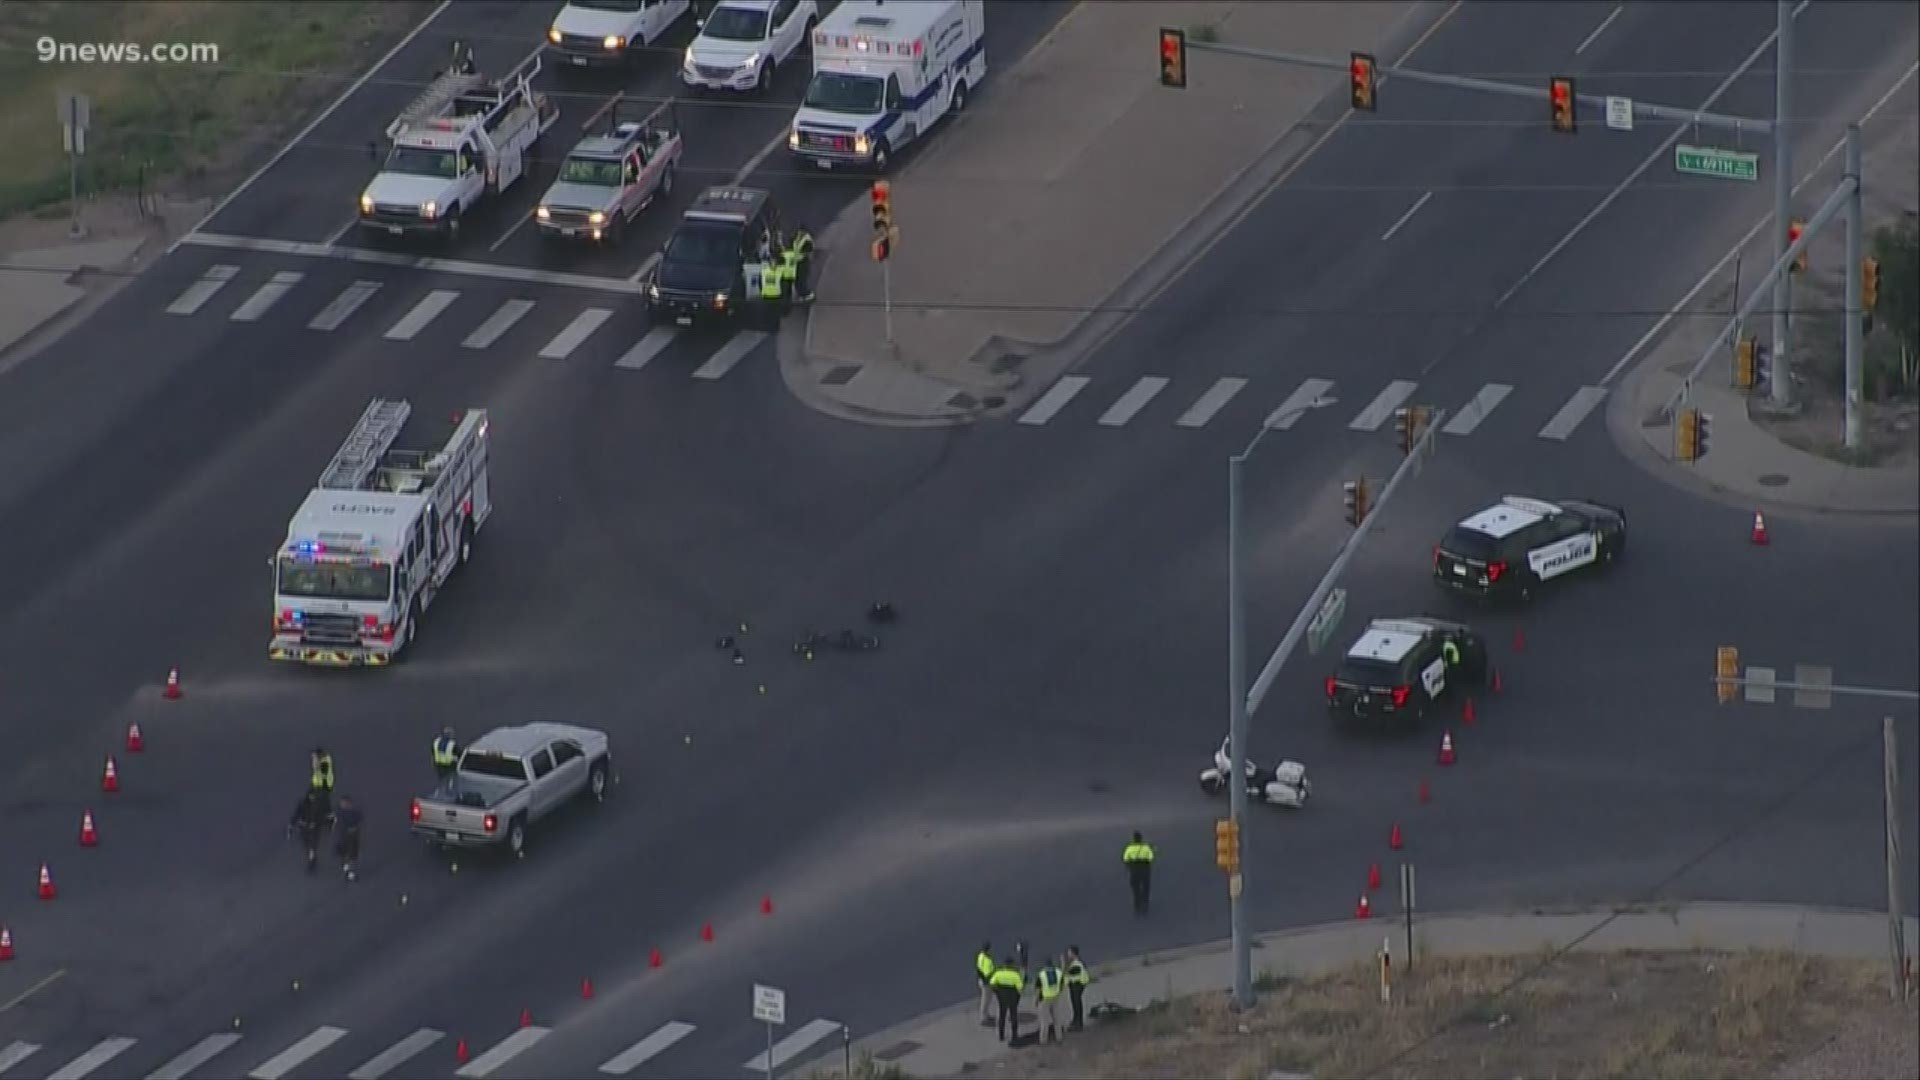 The man was riding his bike through the intersection of Highway 85 and East 69th Avenue when he was hit by the truck, according to police.